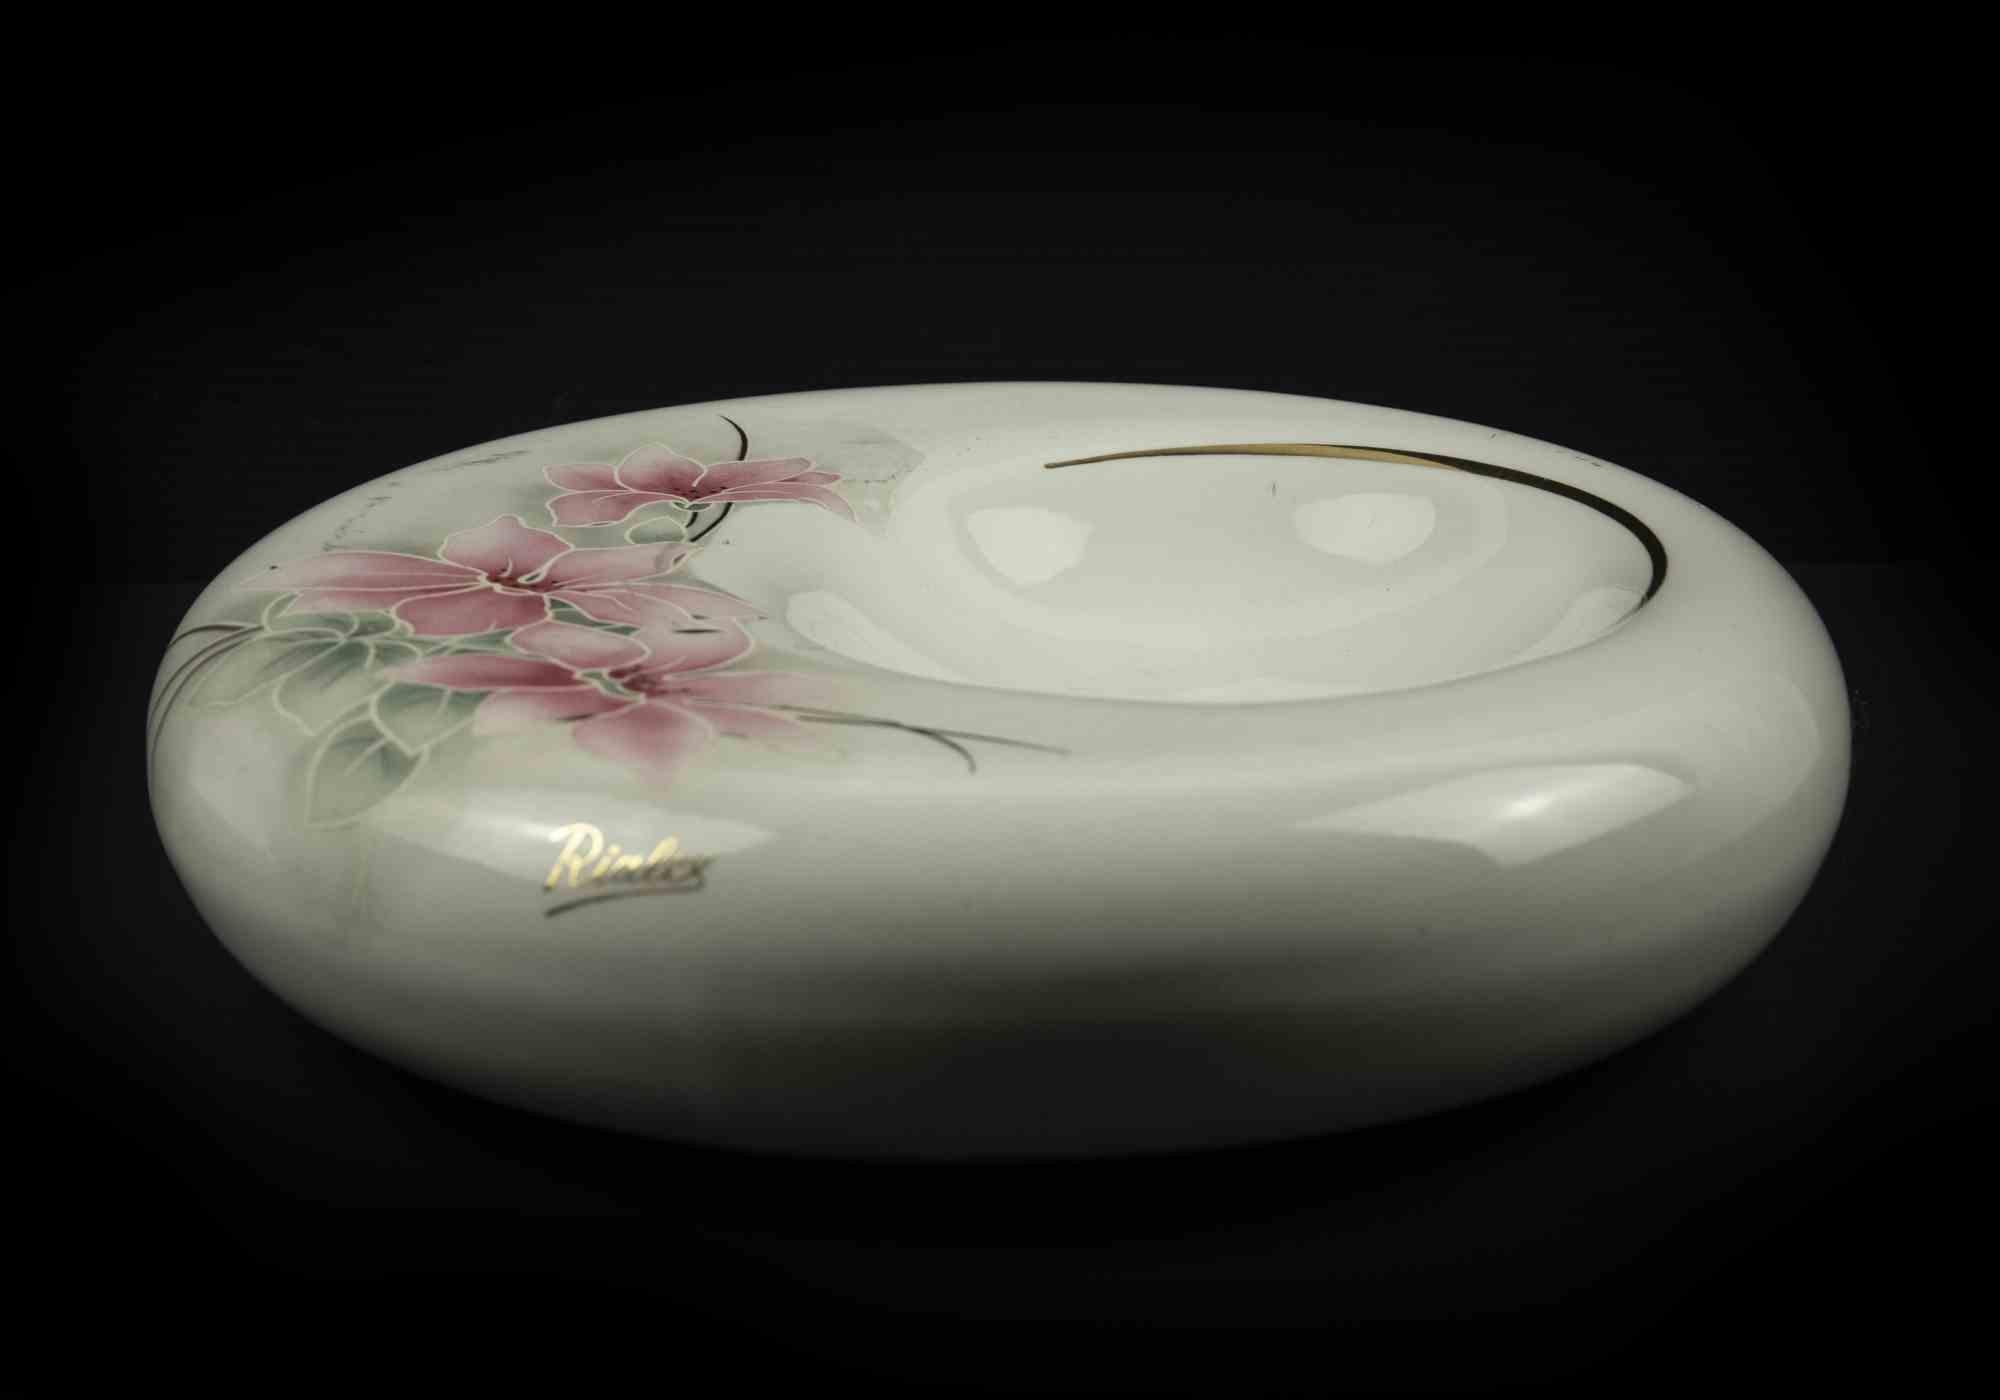 Rialex Ceramix centerpiece is an original object realized in the mid-20th century.

Original fine porcelain with hand-made decoration and golden details. 

Made in Italy. 

On the base the label and the written 